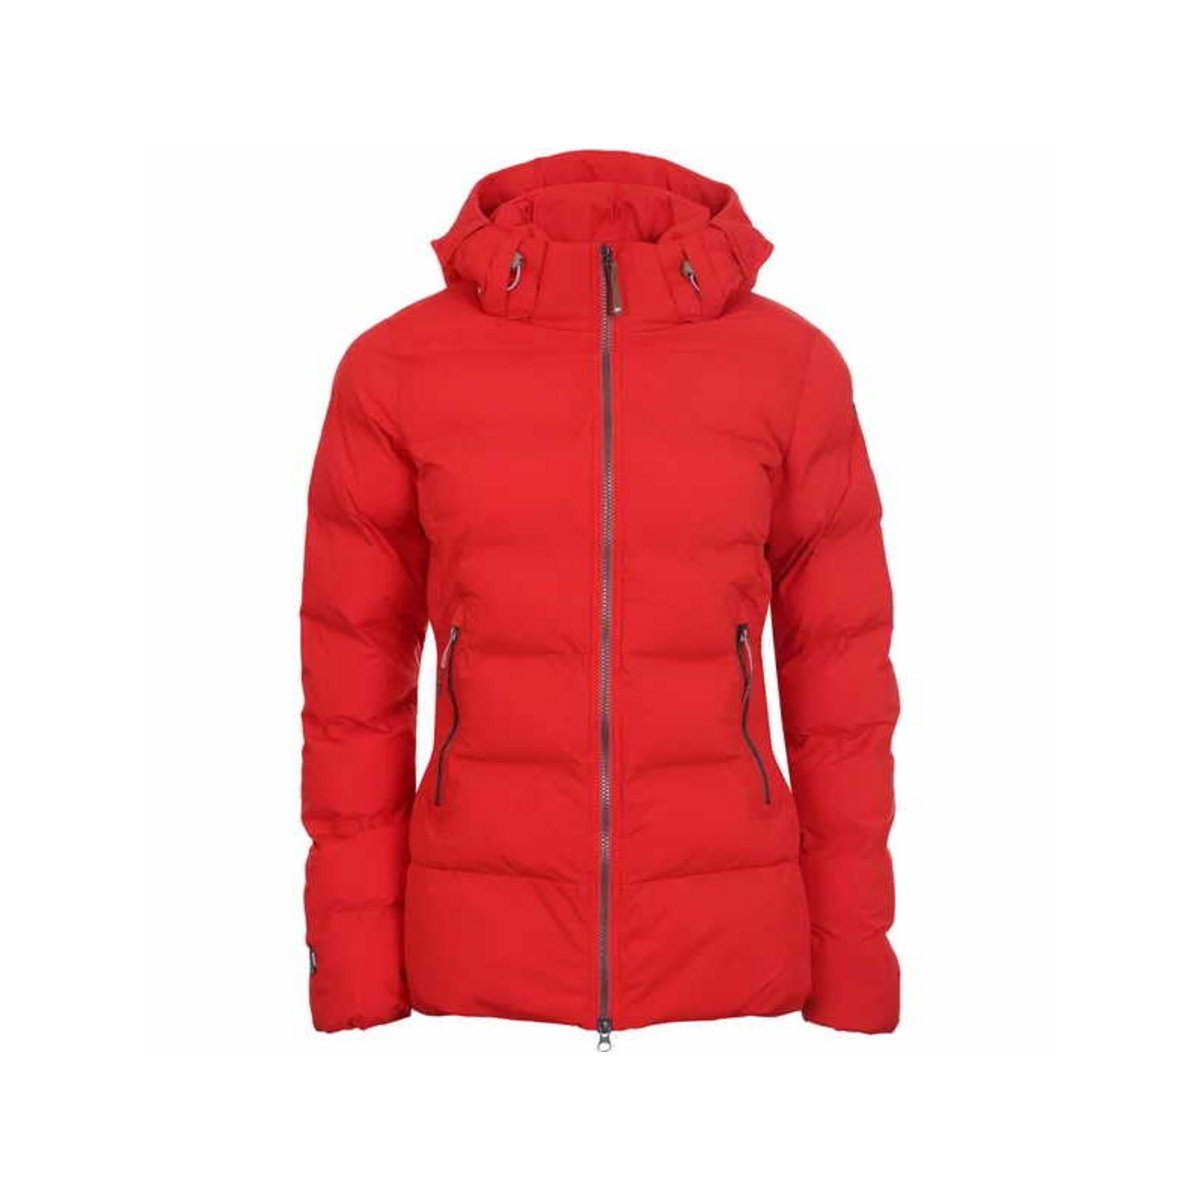 L-Fashion Group GmbH Funktionsjacke rot normal (1-St)